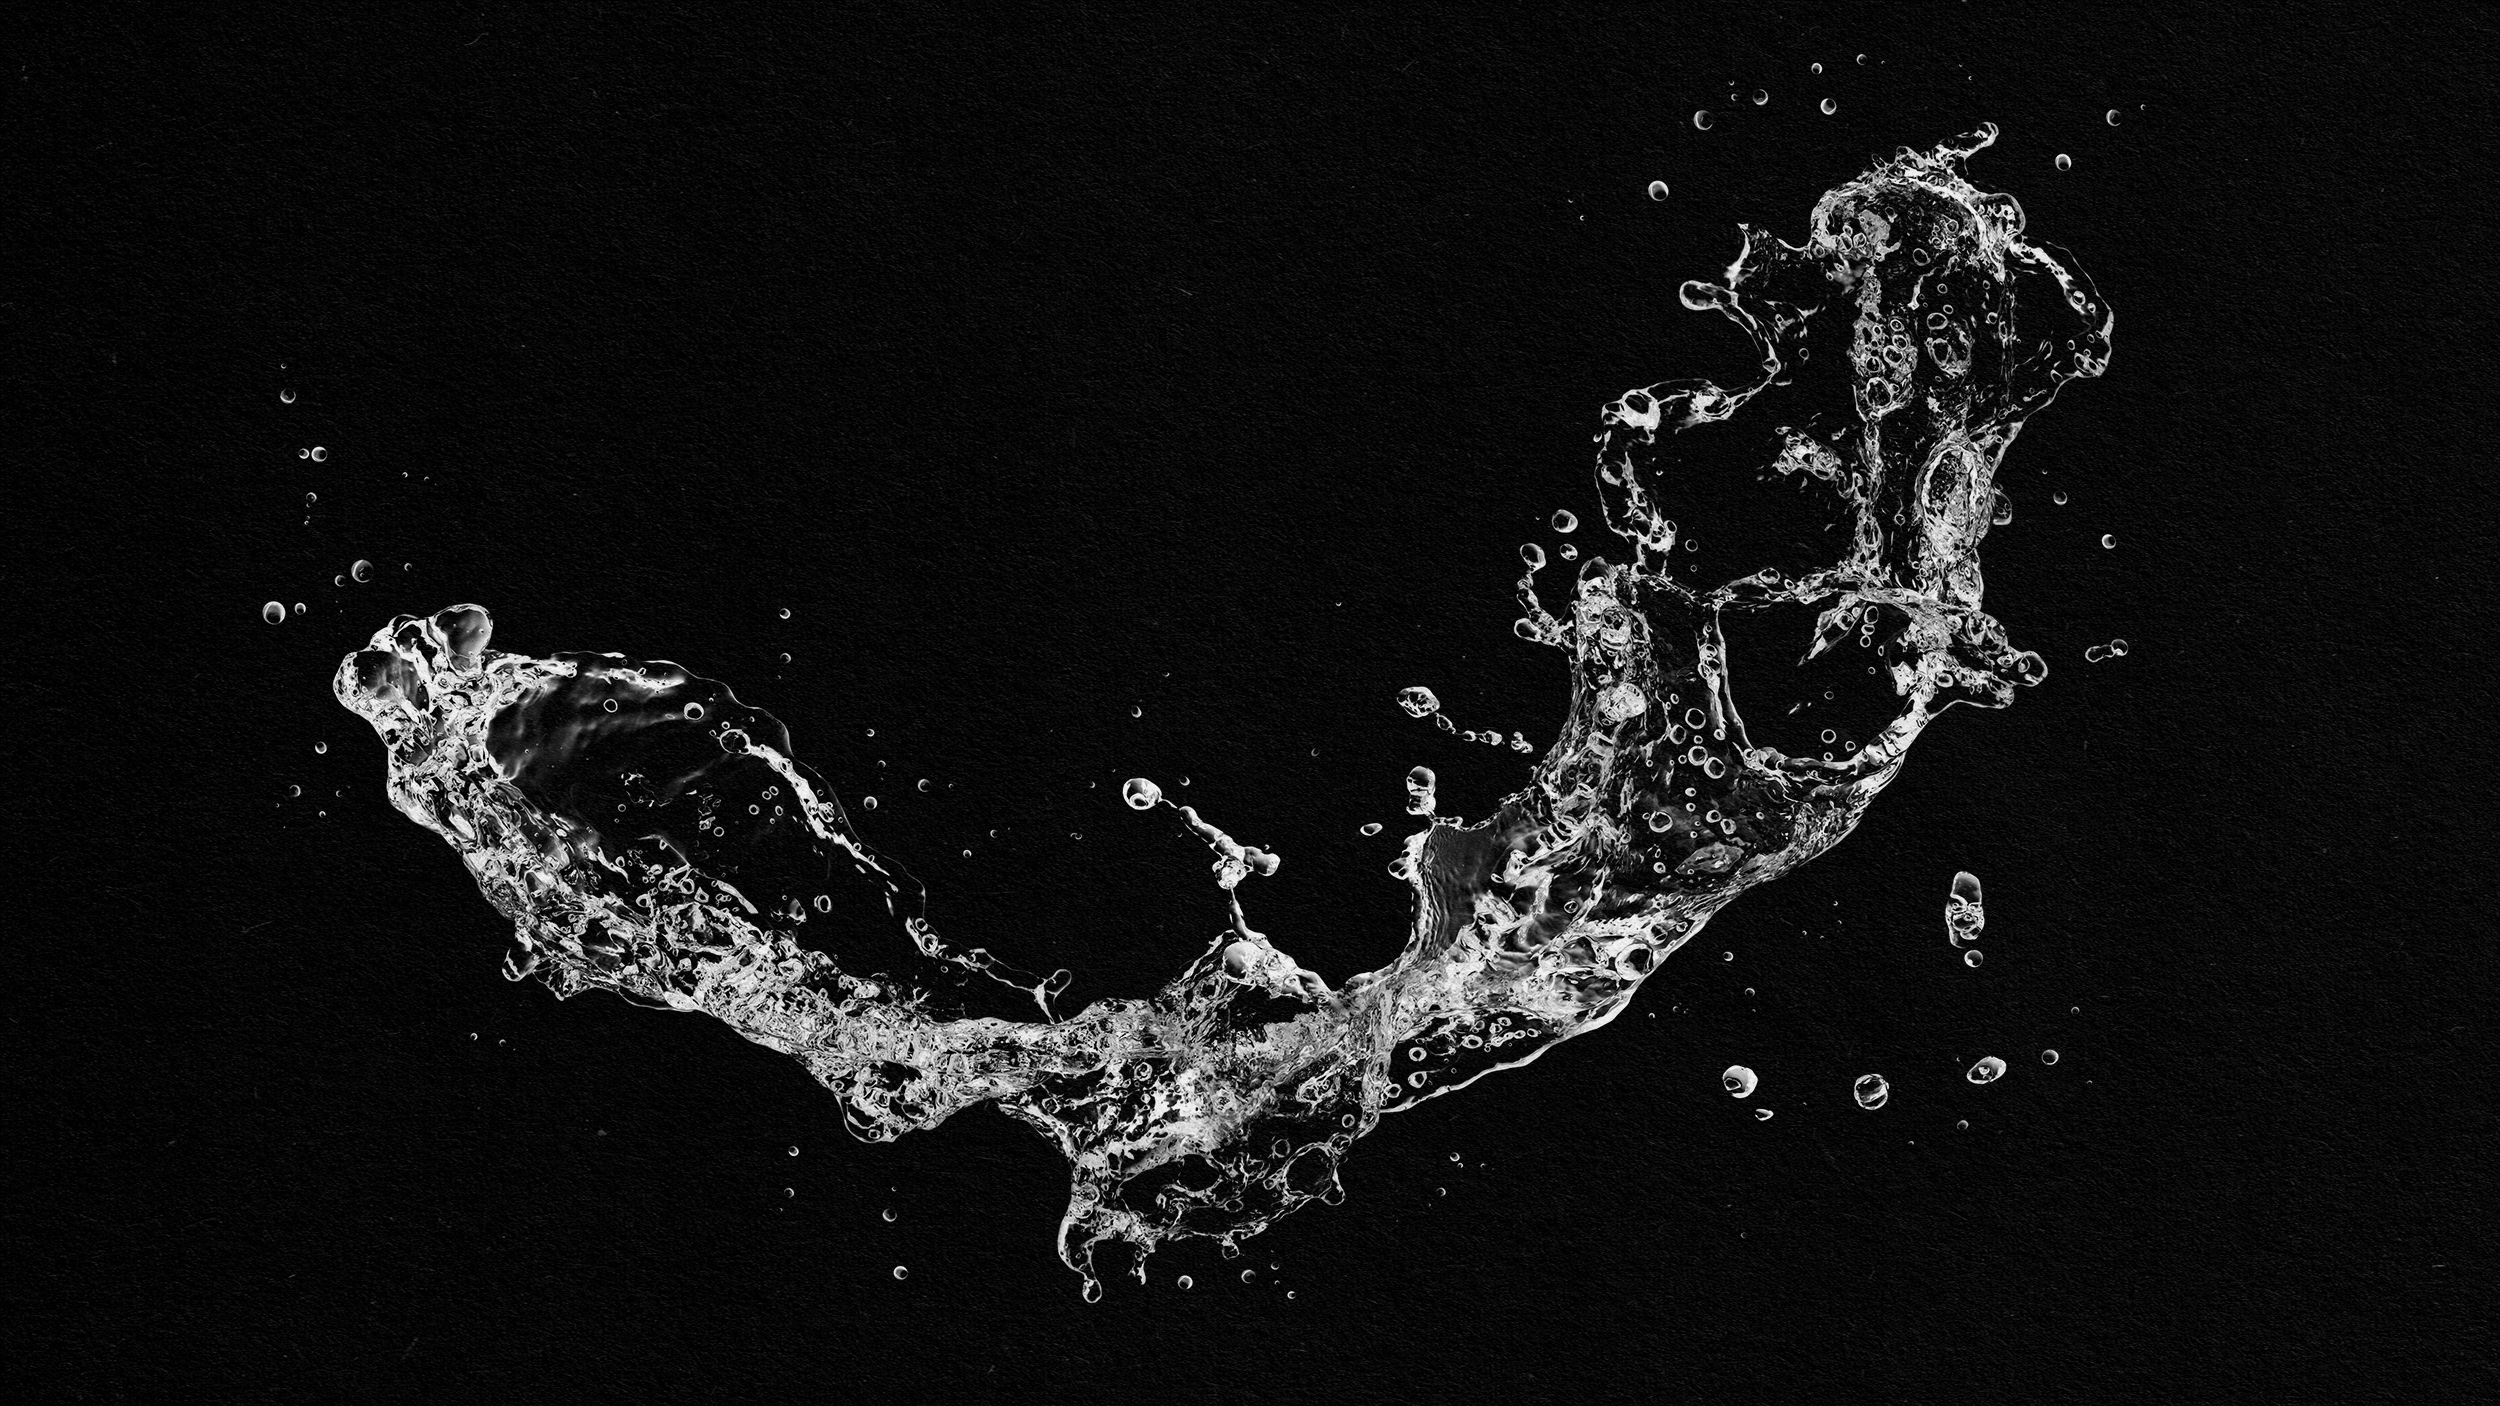 A squirting water splash on a black background.